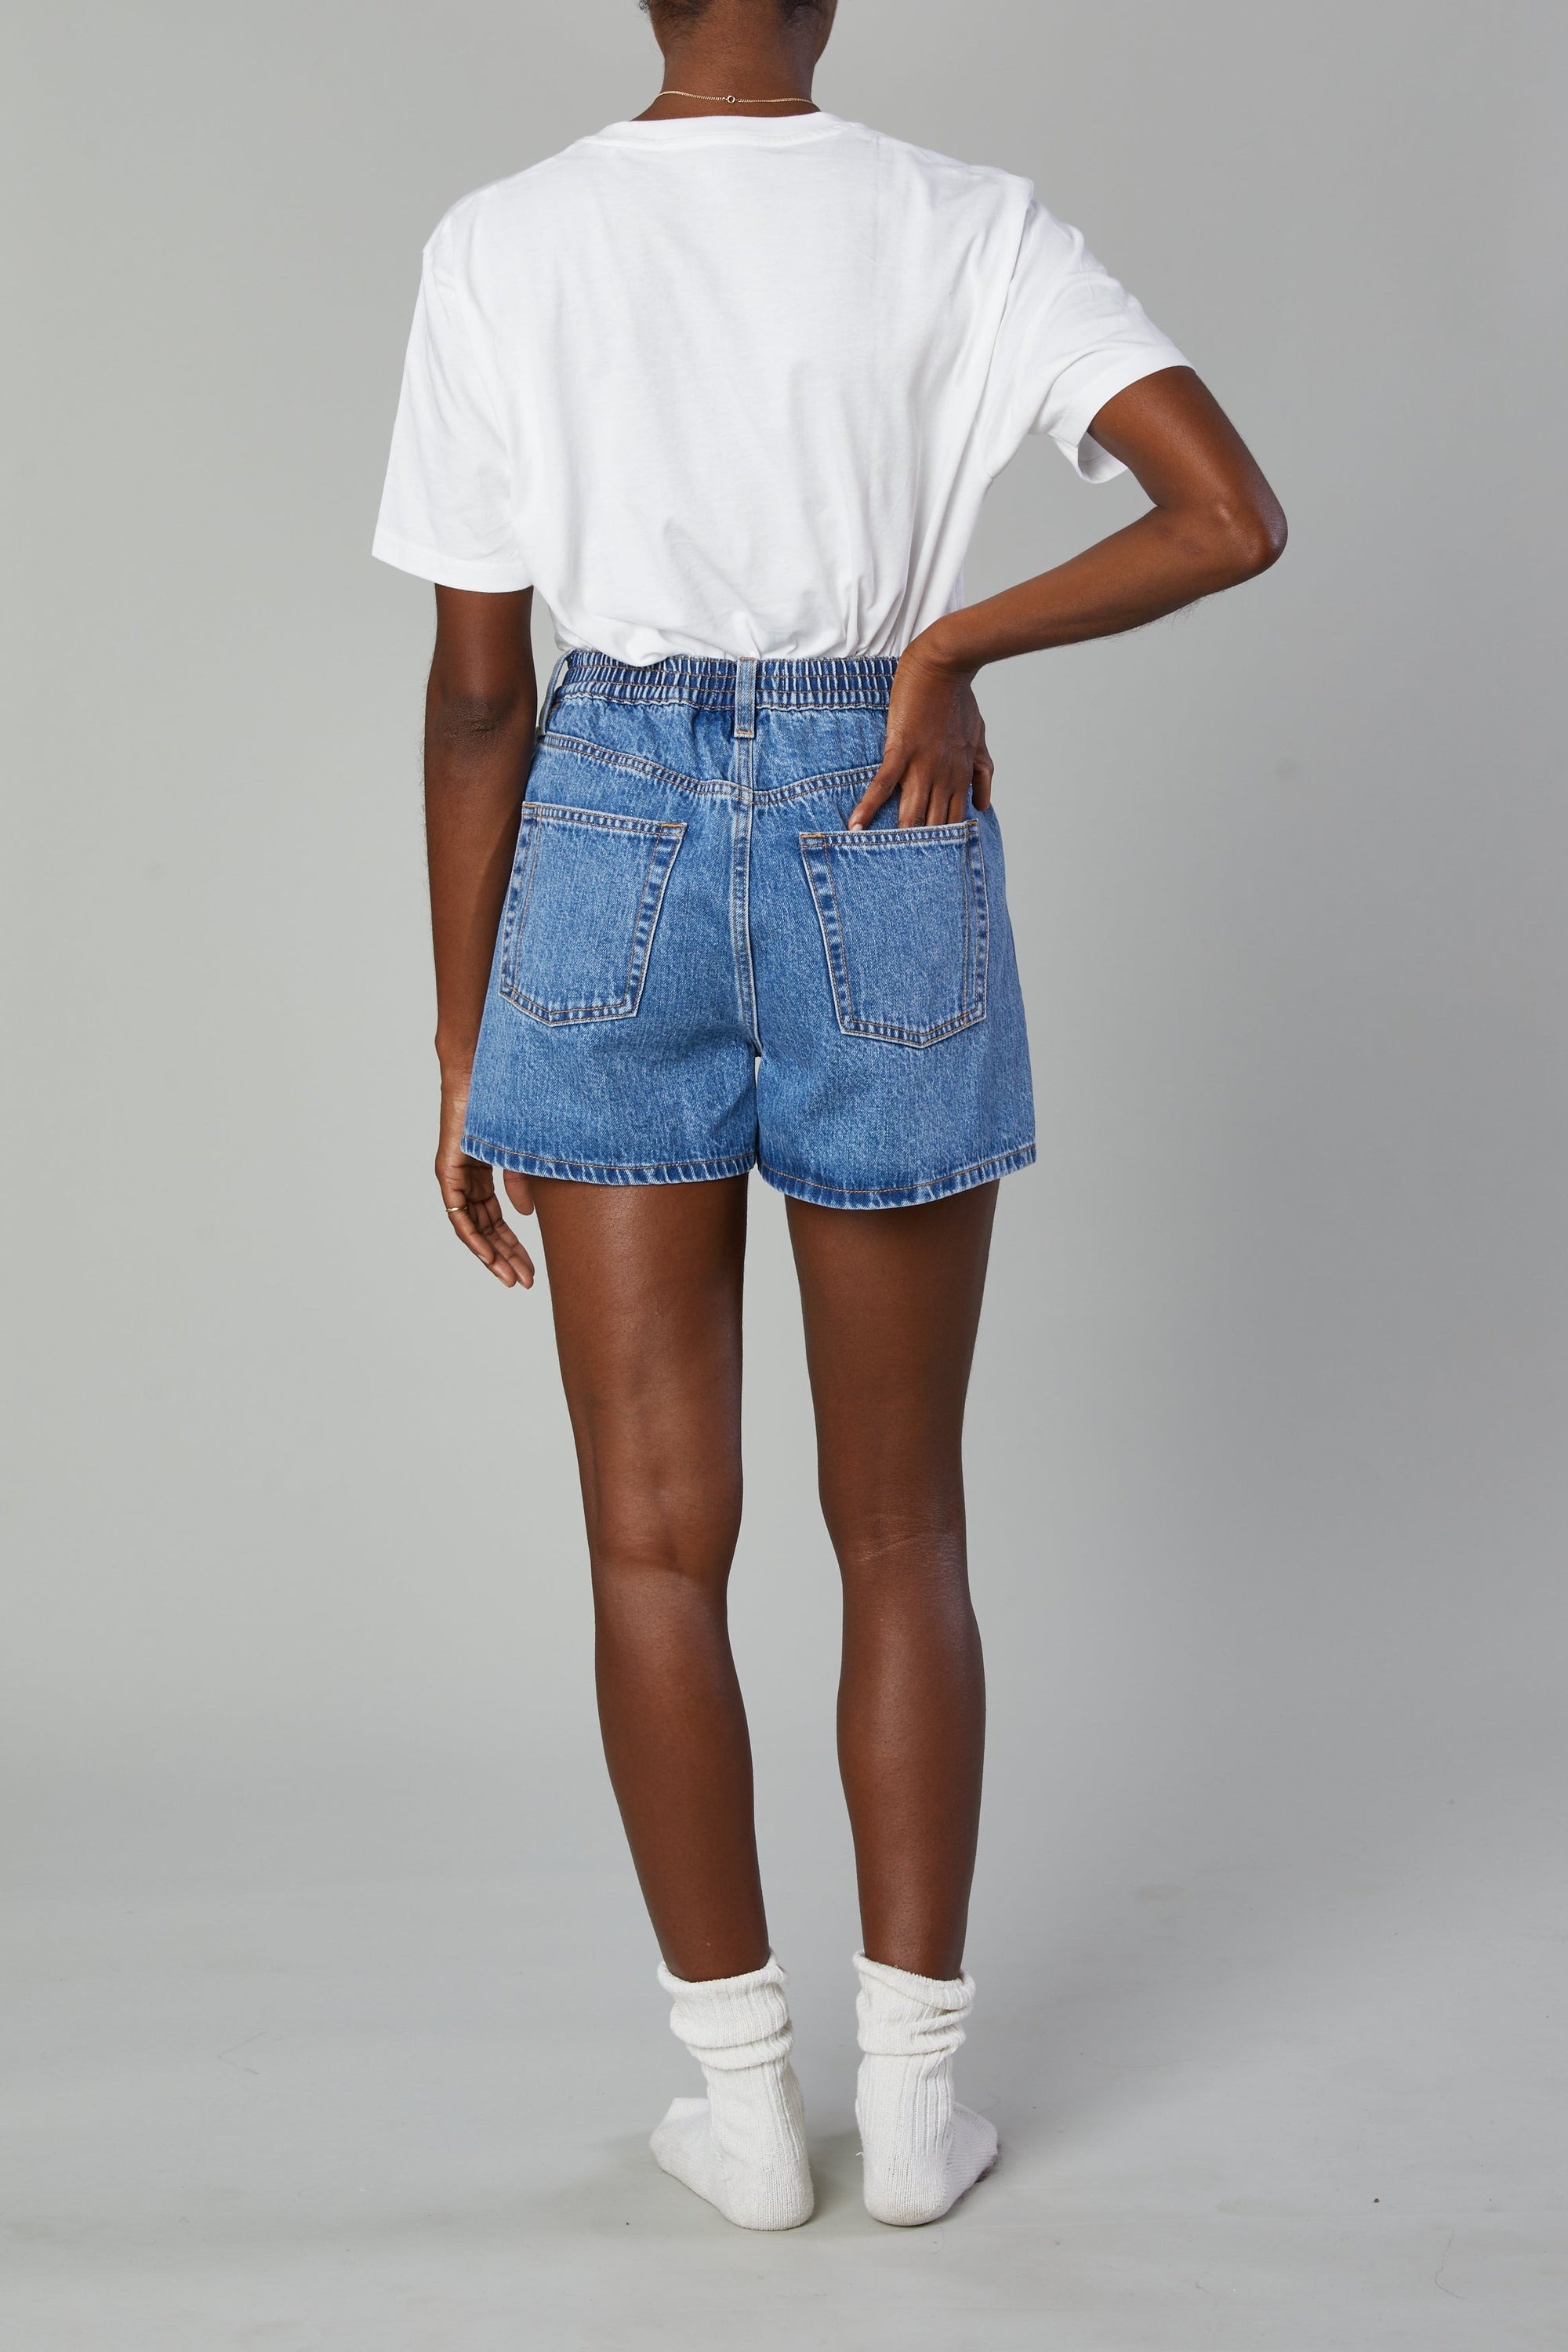 Still Here Ames jean shorts classic blue denim Taylor sSwift swiftie | Pipe and Row